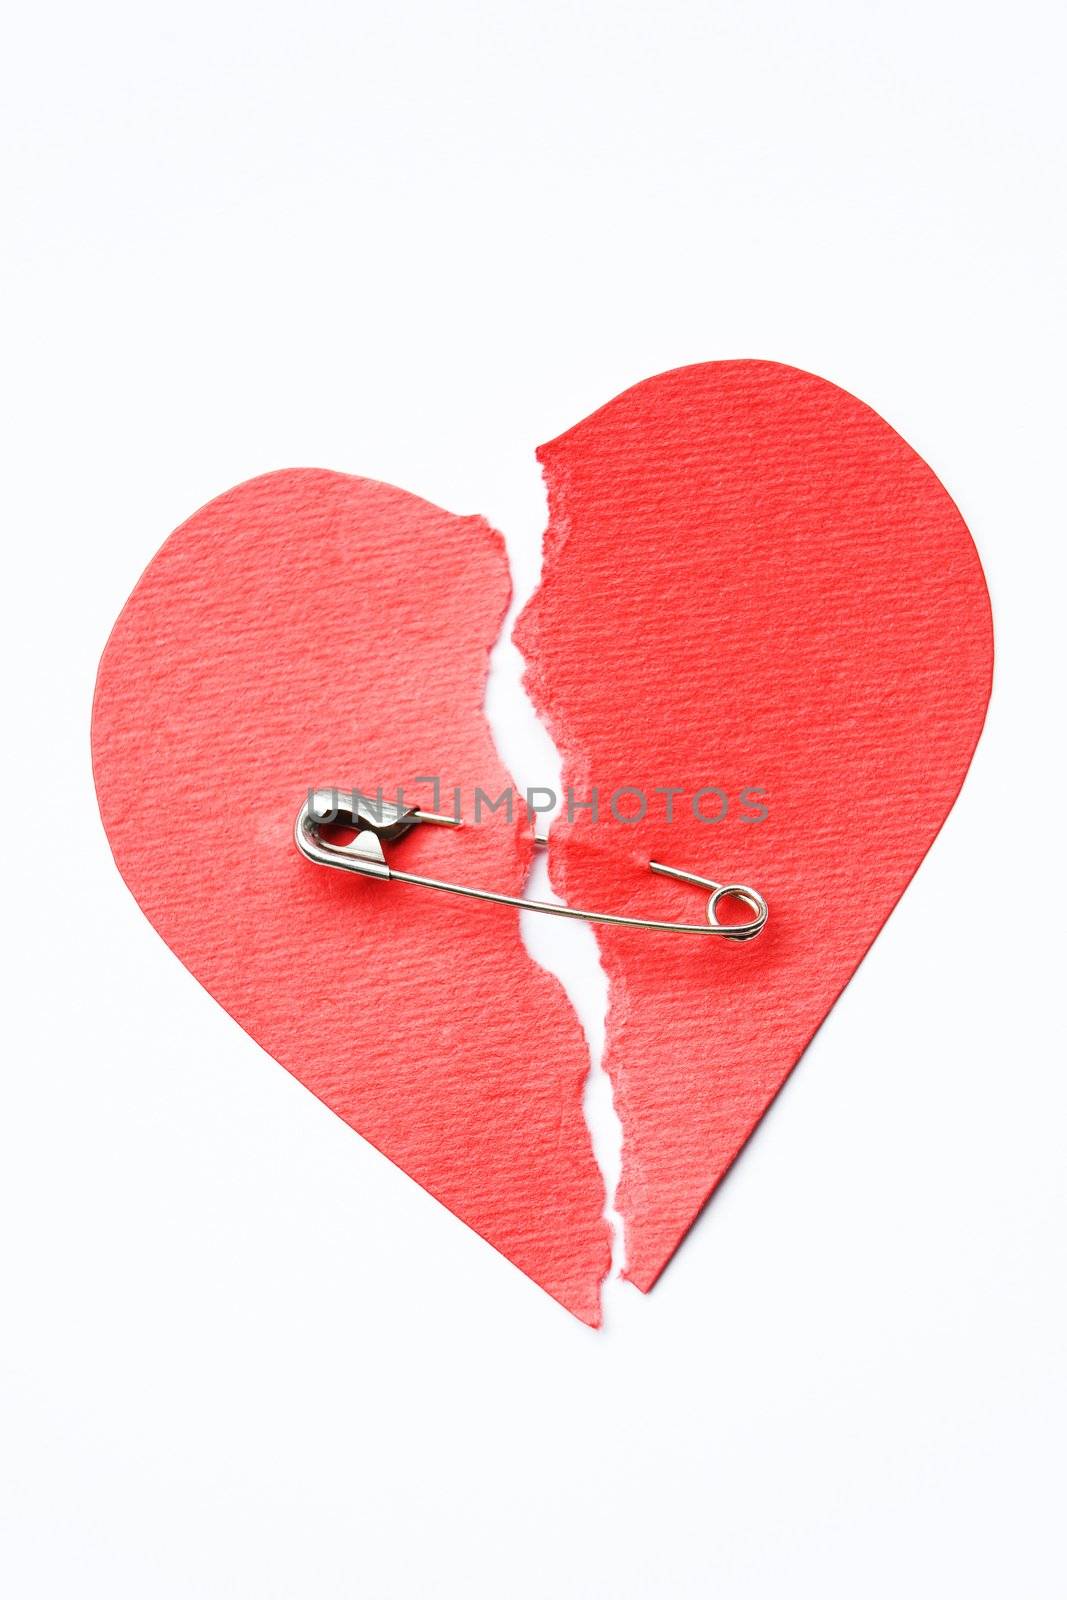 Red paper heart torn in half secured with safety pin on white background